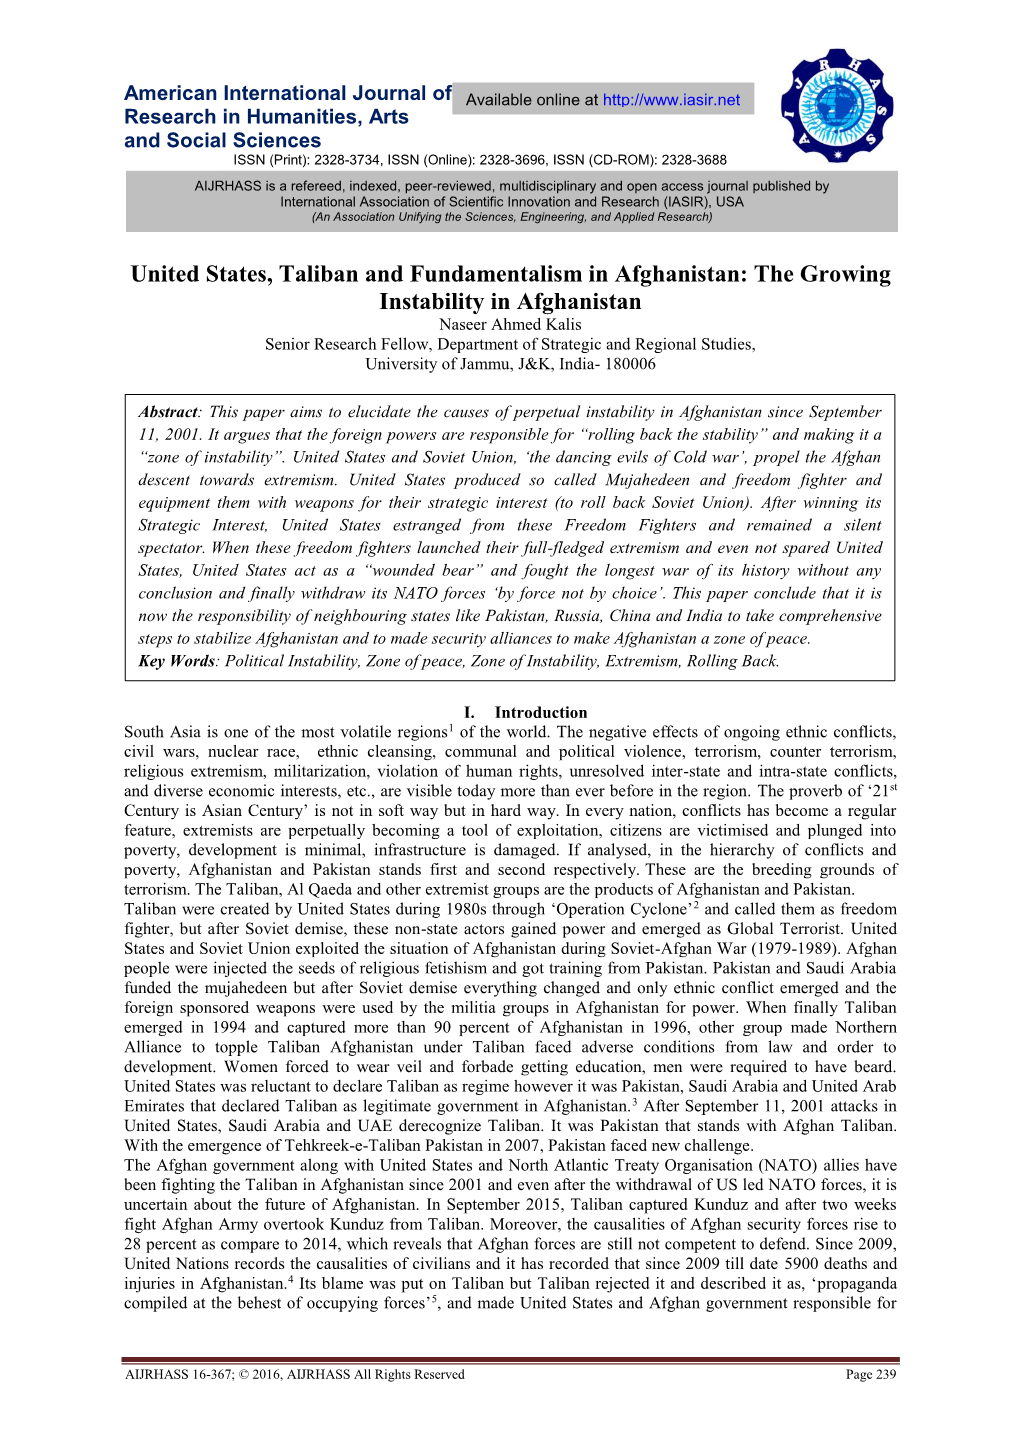 United States, Taliban and Fundamentalism in Afghanistan